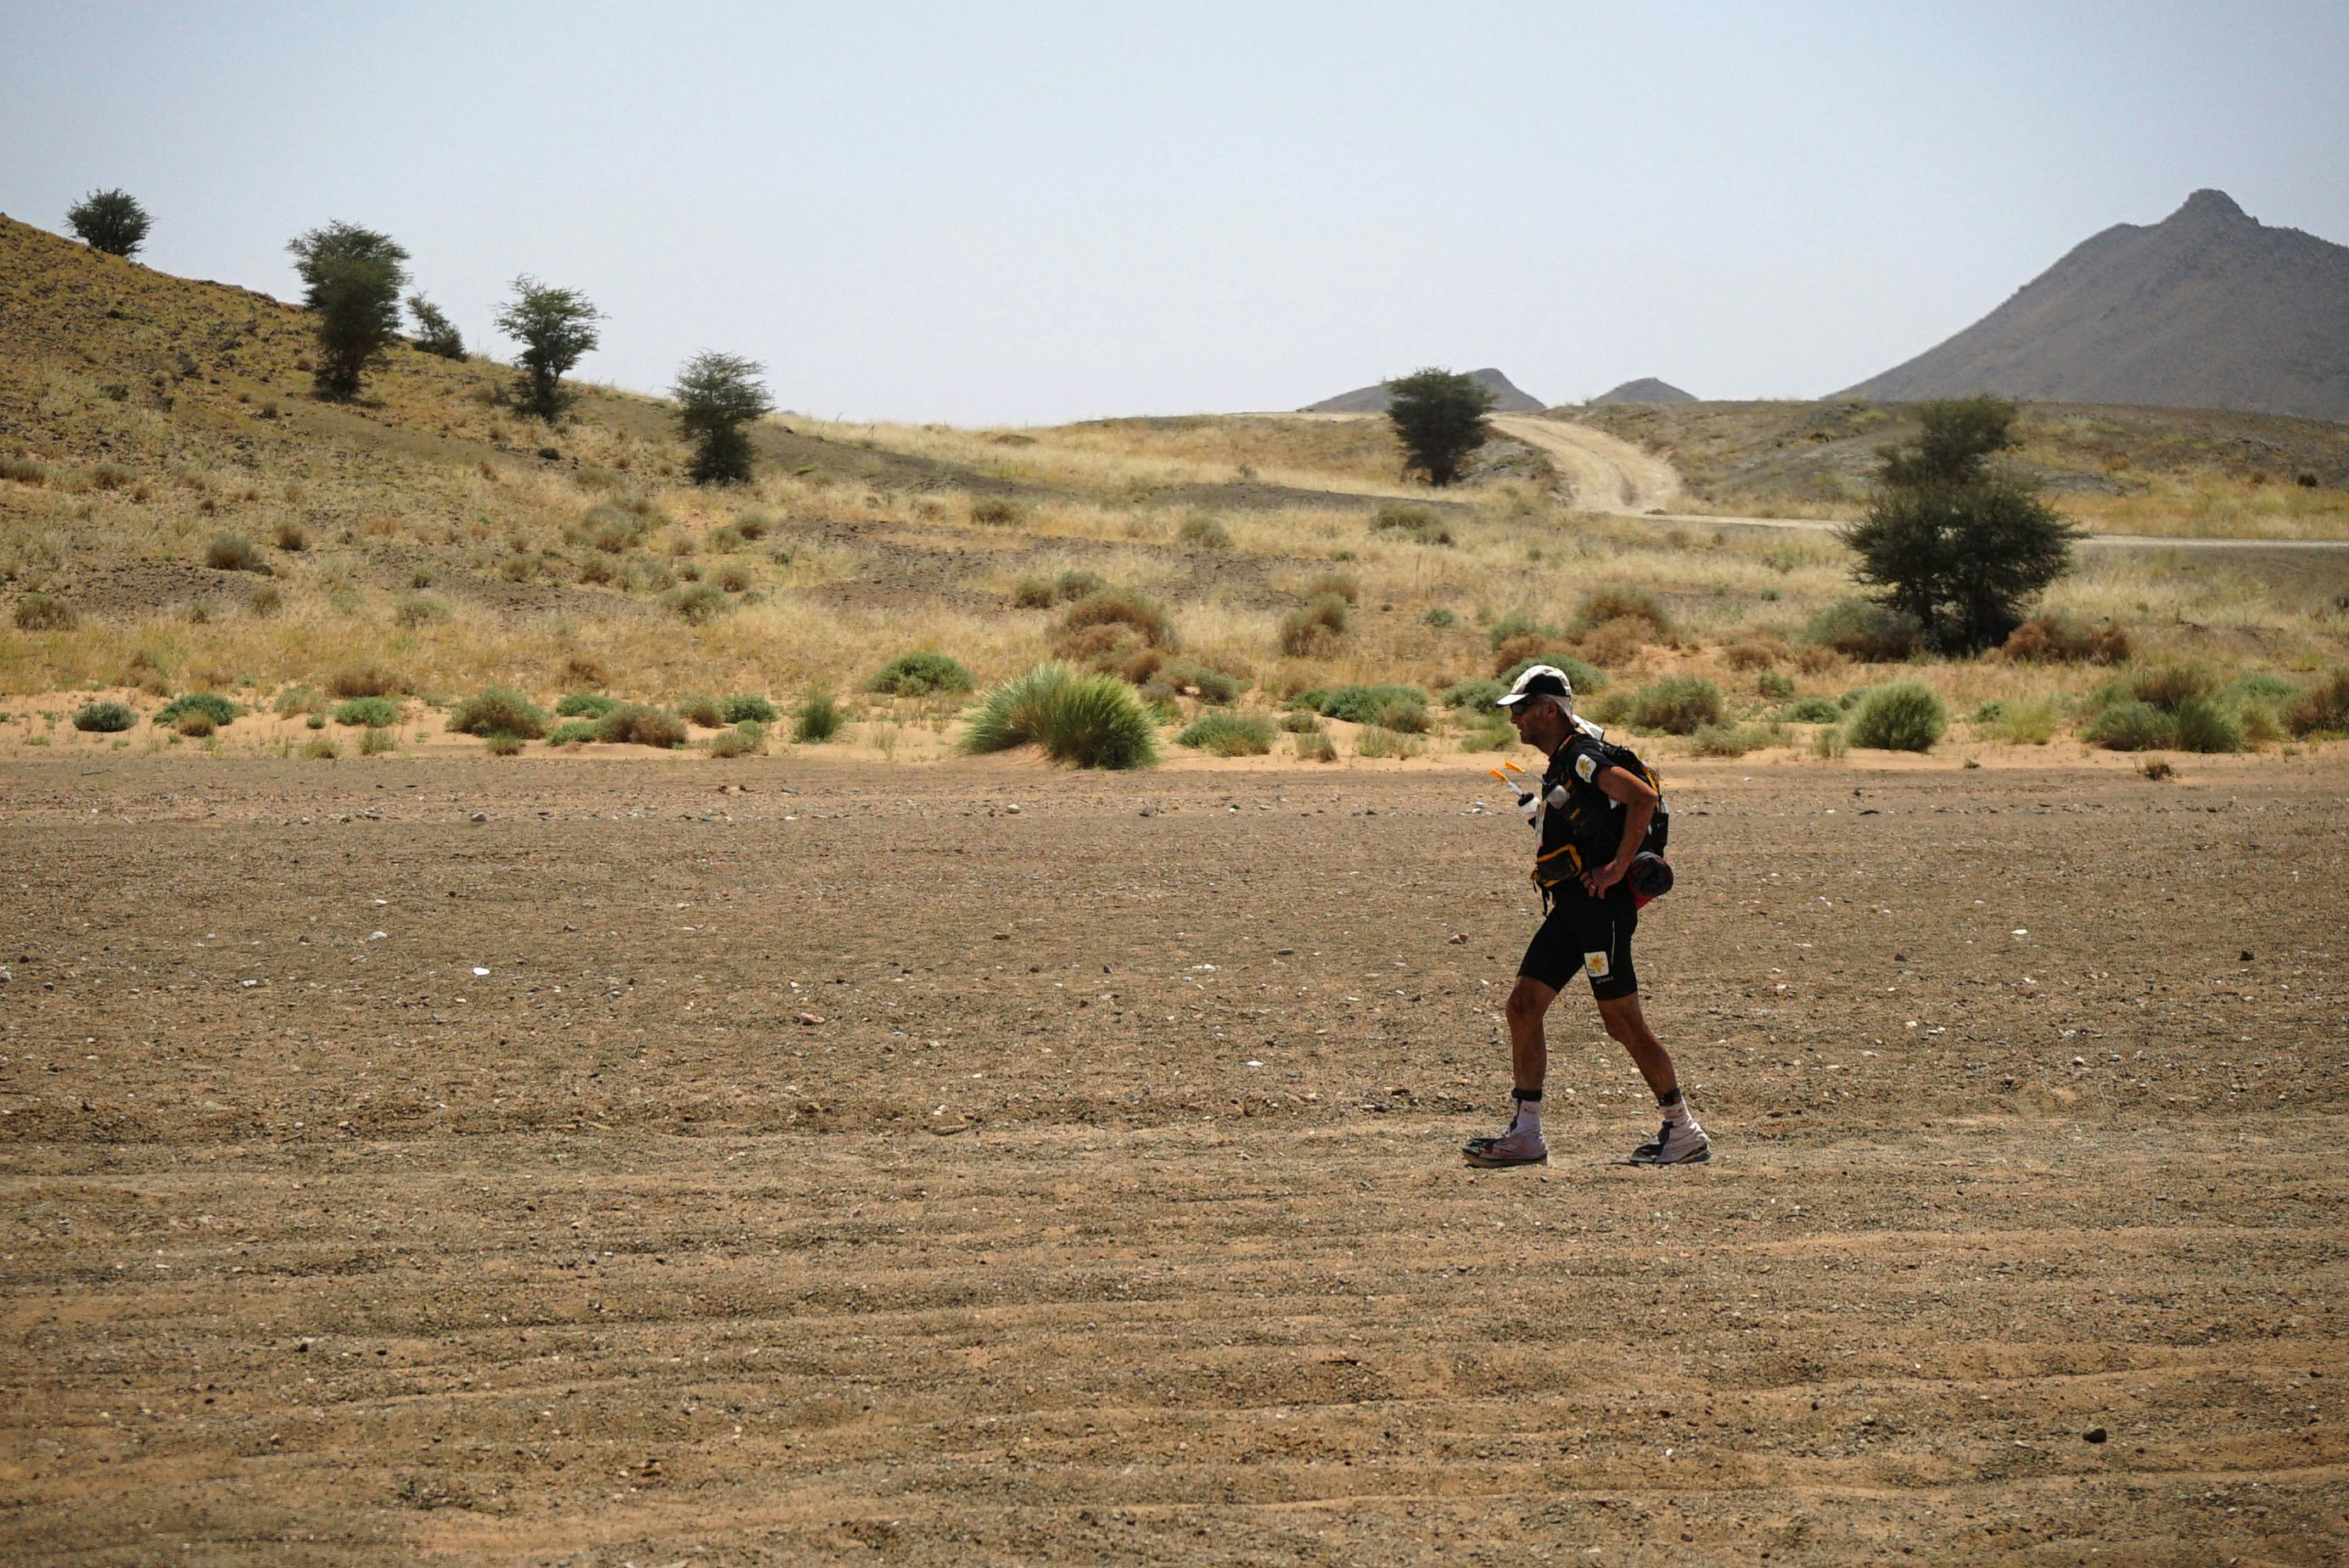 Sir Ran, wearing lycra shorts, a long hat and sunglasses, trods across the rocky sands of Morocco in the Marathon des Sables.